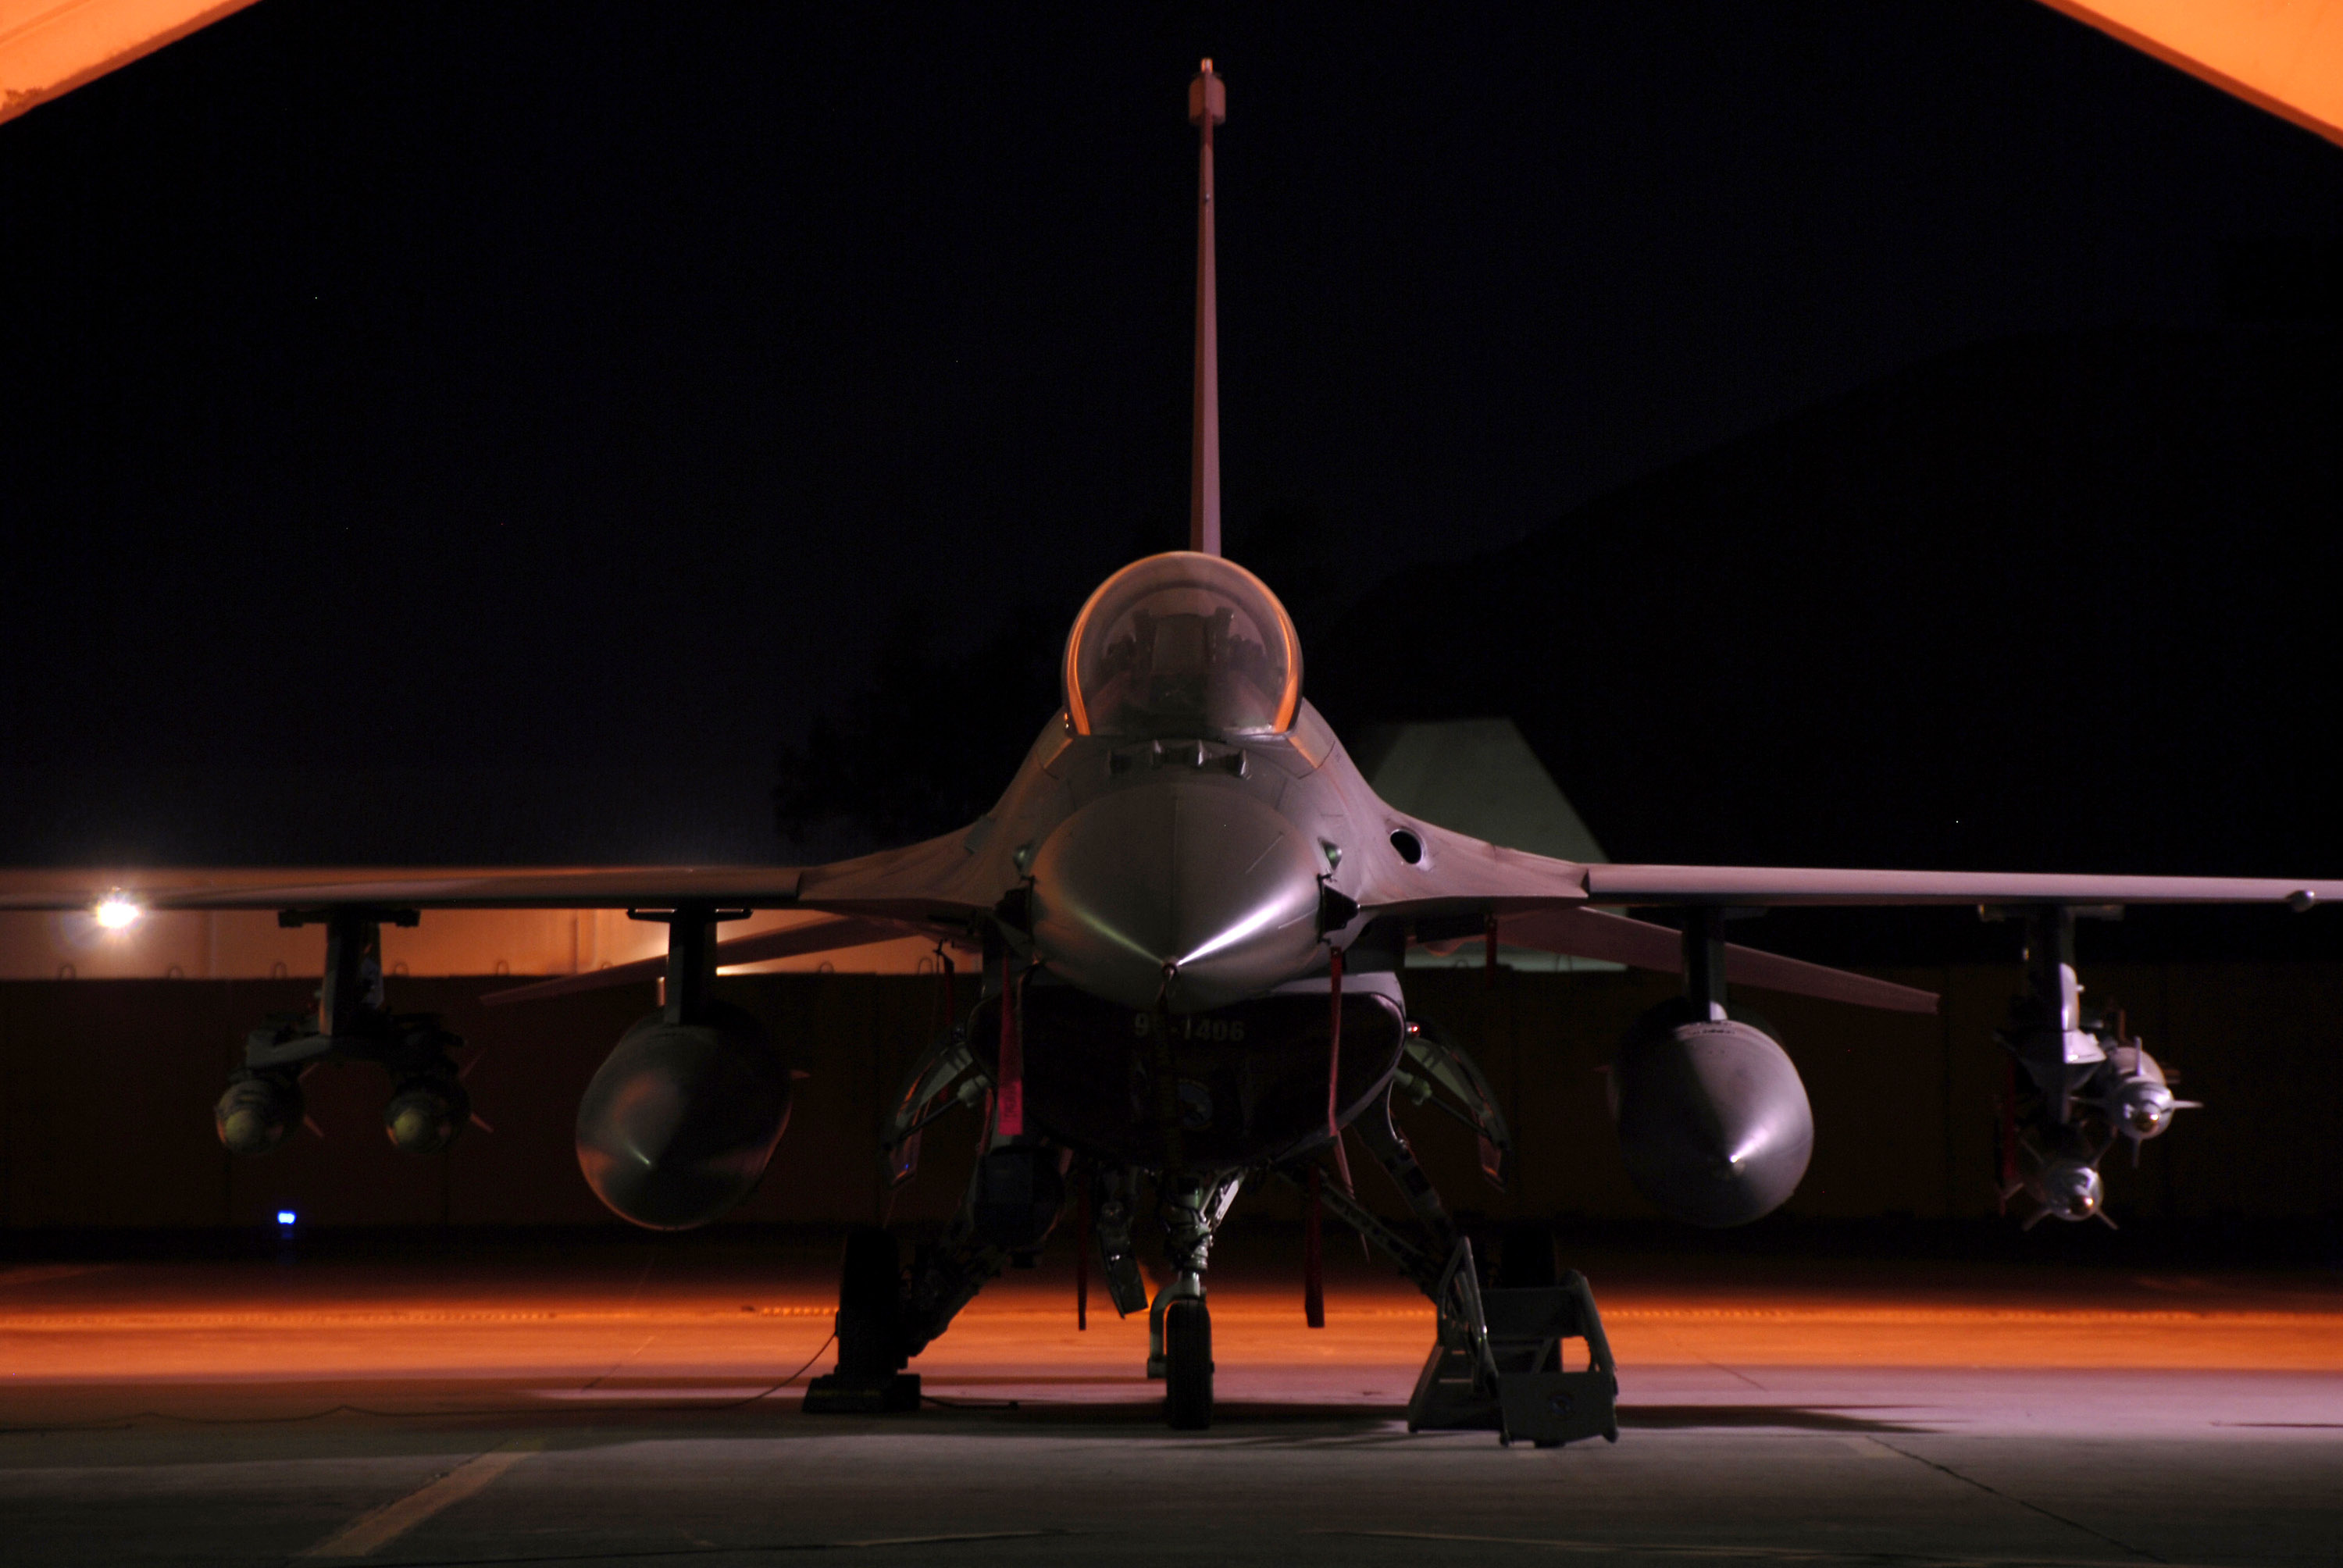 Military General Dynamics F-16 Fighting Falcon HD Wallpaper | Background Image